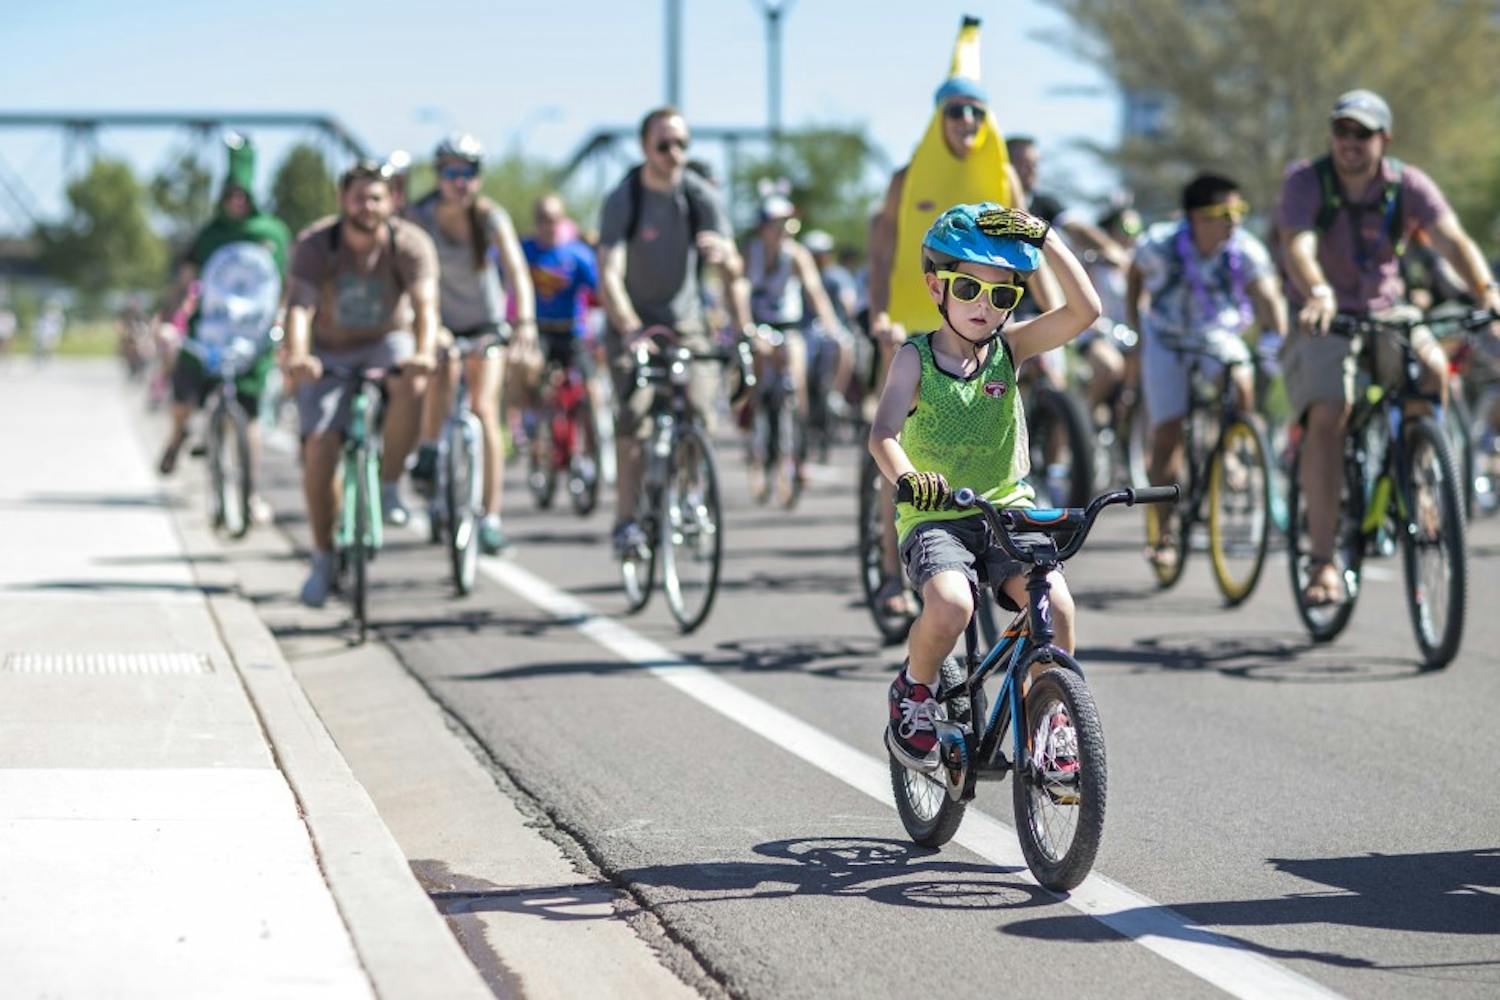 Bikers ride down W Rio Salado Pkwy during the bike parade on Saturday, Oct. 3, 2015. The annual Tour de Fat celebration features a costumed bike parade around Tempe.